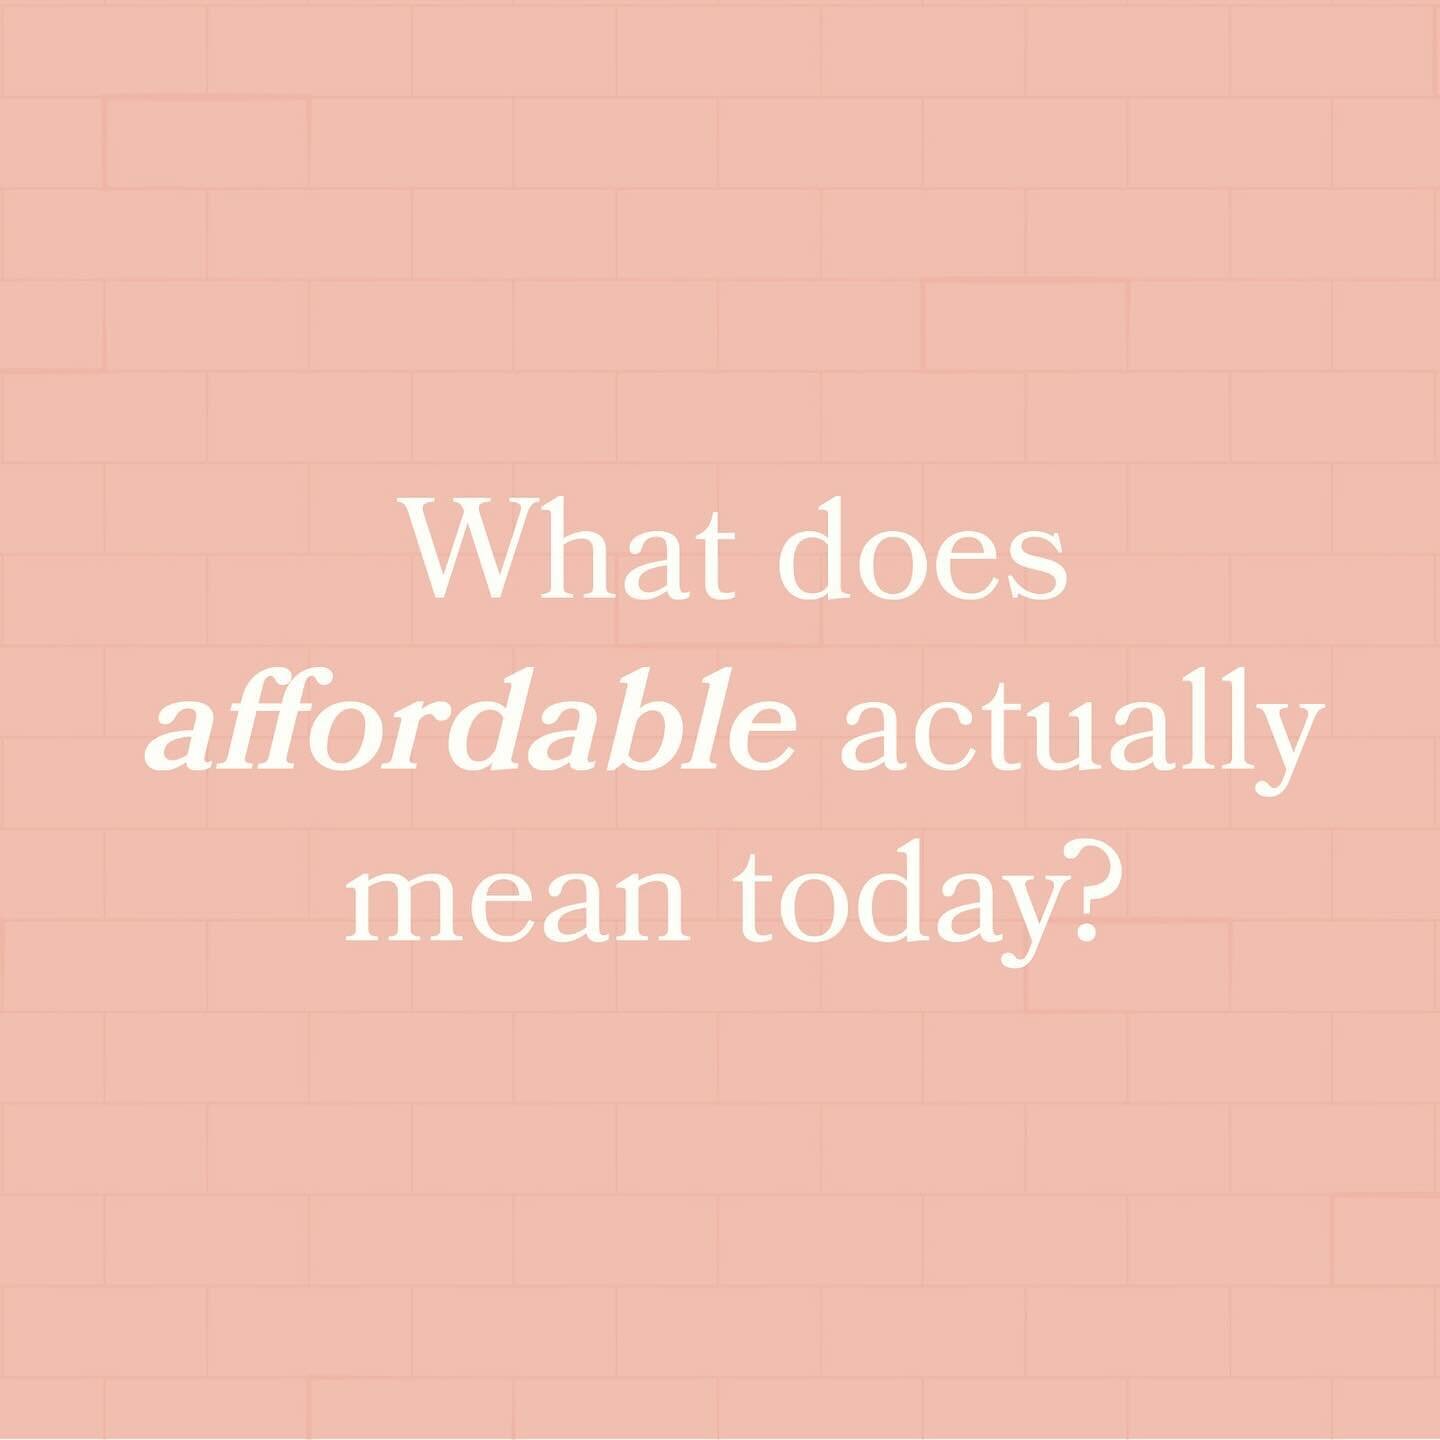 This is one of the most frequently asked questions when it comes to affordable housing in Ireland - what does affordability actually mean in today&rsquo;s climate?

#&Oacute;Cualann #AffordableHousing #BuildingBrighterFutures